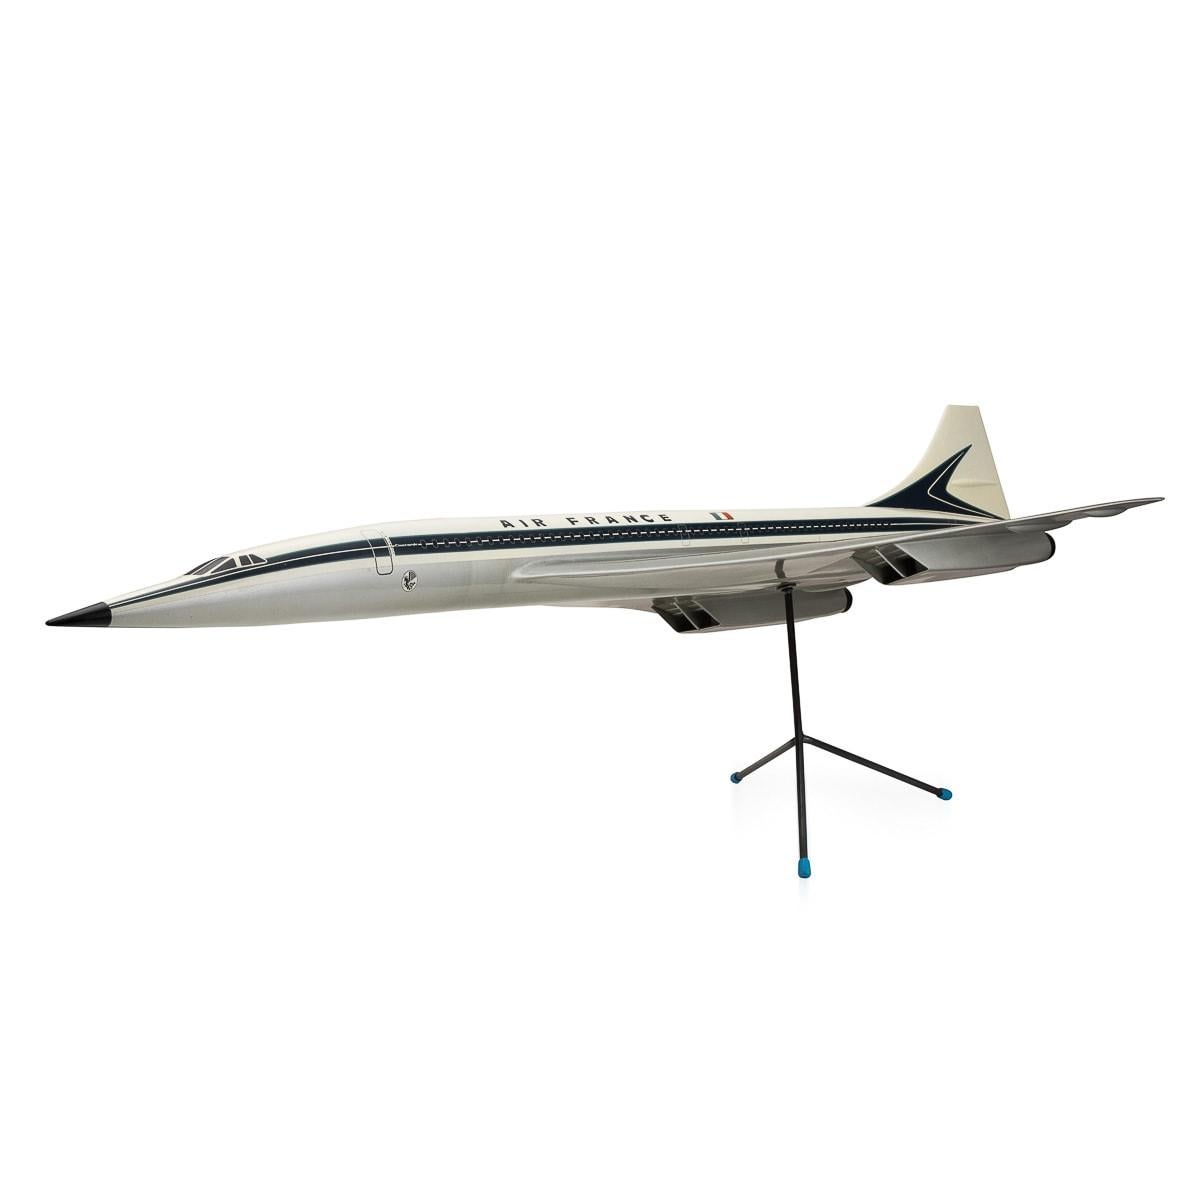 A splendid plastic composite model of a Air France Concorde in in blue and white mounted on a tripod stand by Space Models, circa 1990. This scaled down aircraft model was presented to one of Air france's top travel agents to use for marketing